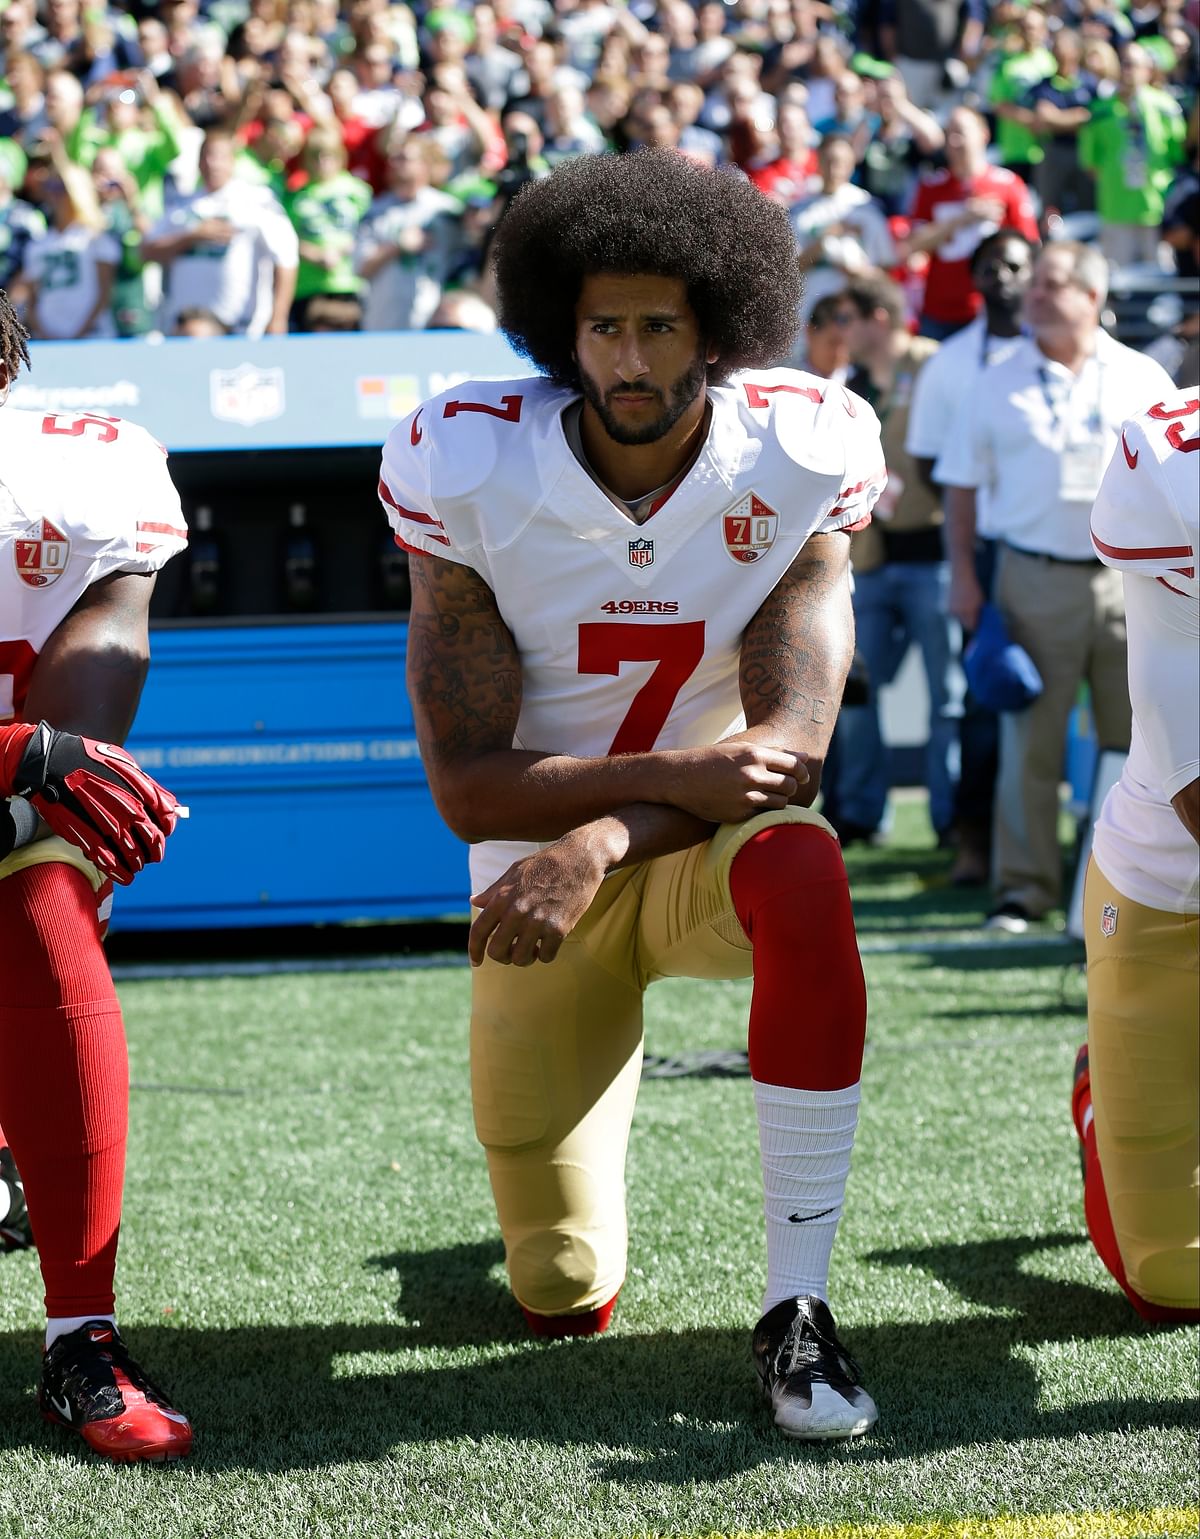 Nike is caught in the middle of a controversy after wading into football’s national anthem debate.